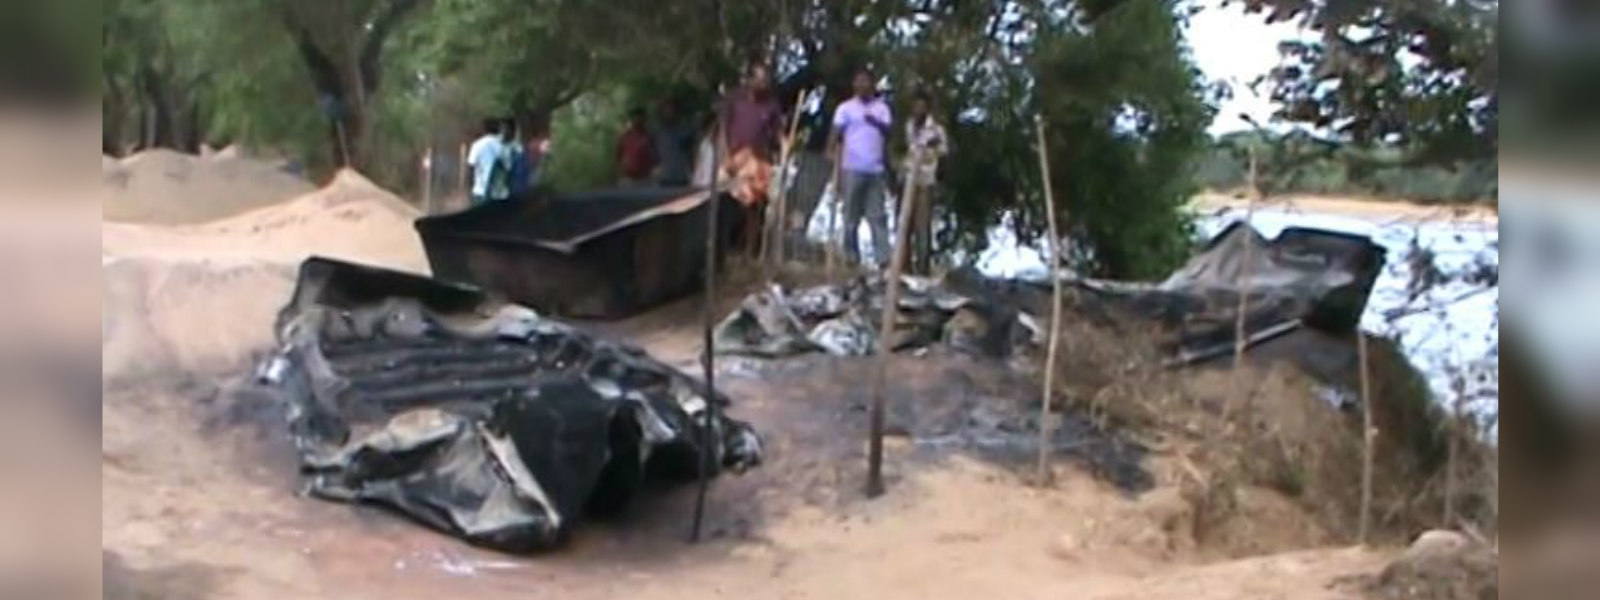 Fire destroys 25 boats used for sand mining